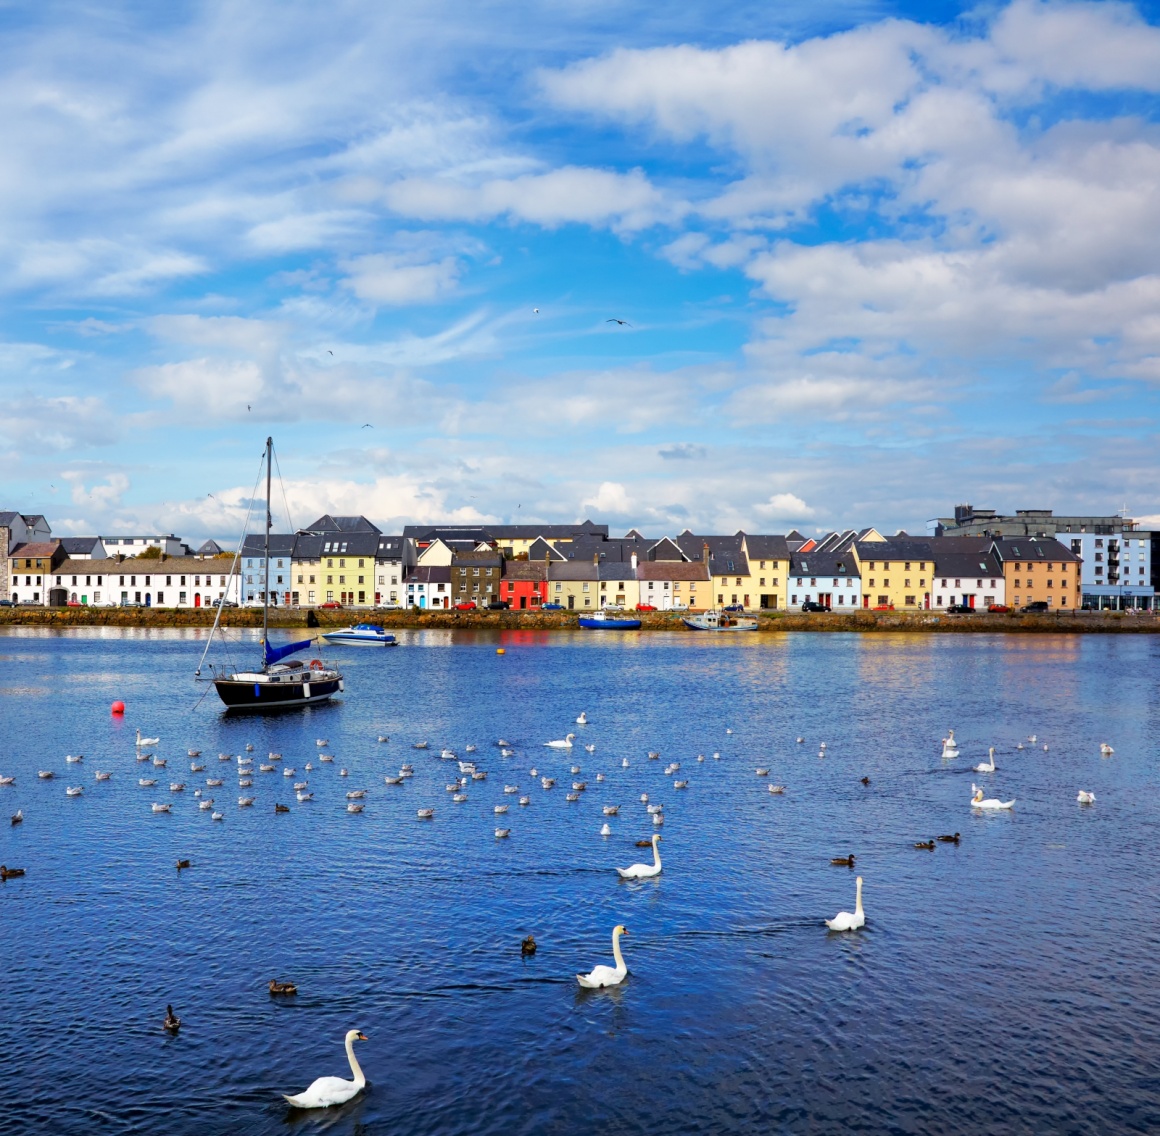 'The Claddagh in Galway city during summertime, Ireland.' - Ireland